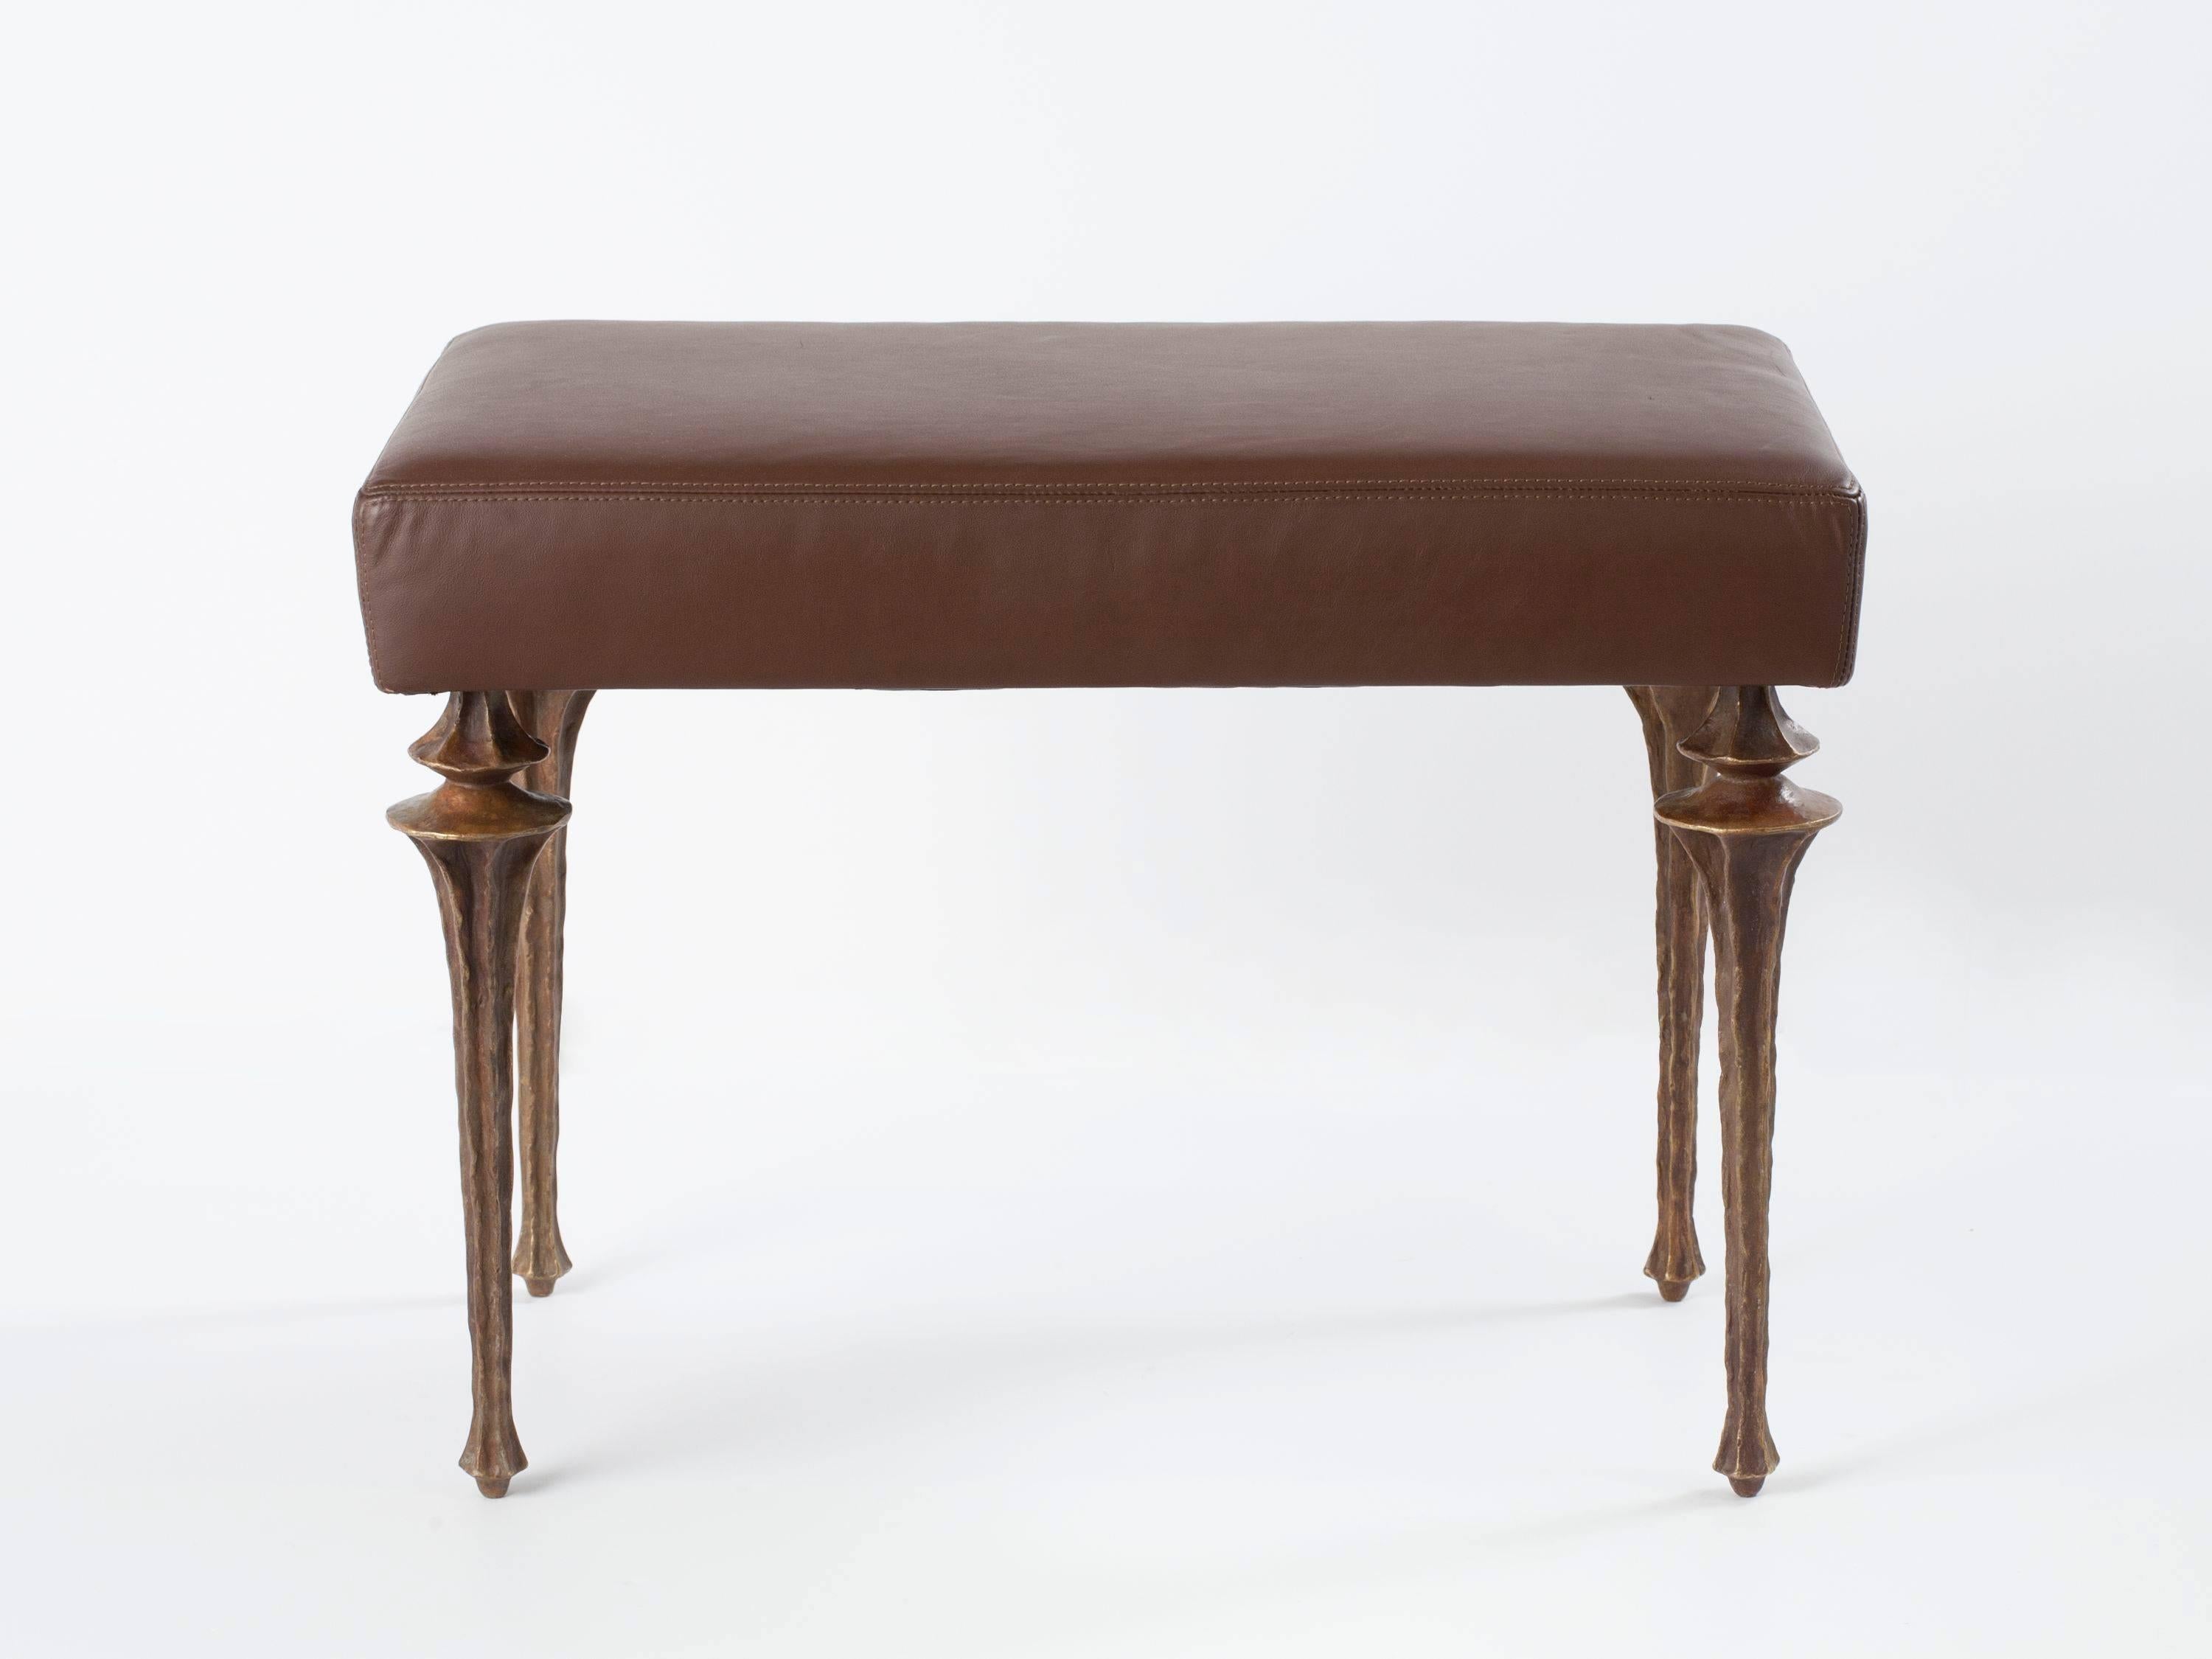 A four legged piece in bronze and leather, perfect as a seat or an ottoman. Size and upholstery are customizable upon request.

Marc studied at L’école Nationale Supérieure des Arts Décoratifs (ENSAD) and at The Ecole Nationale Supérieure des